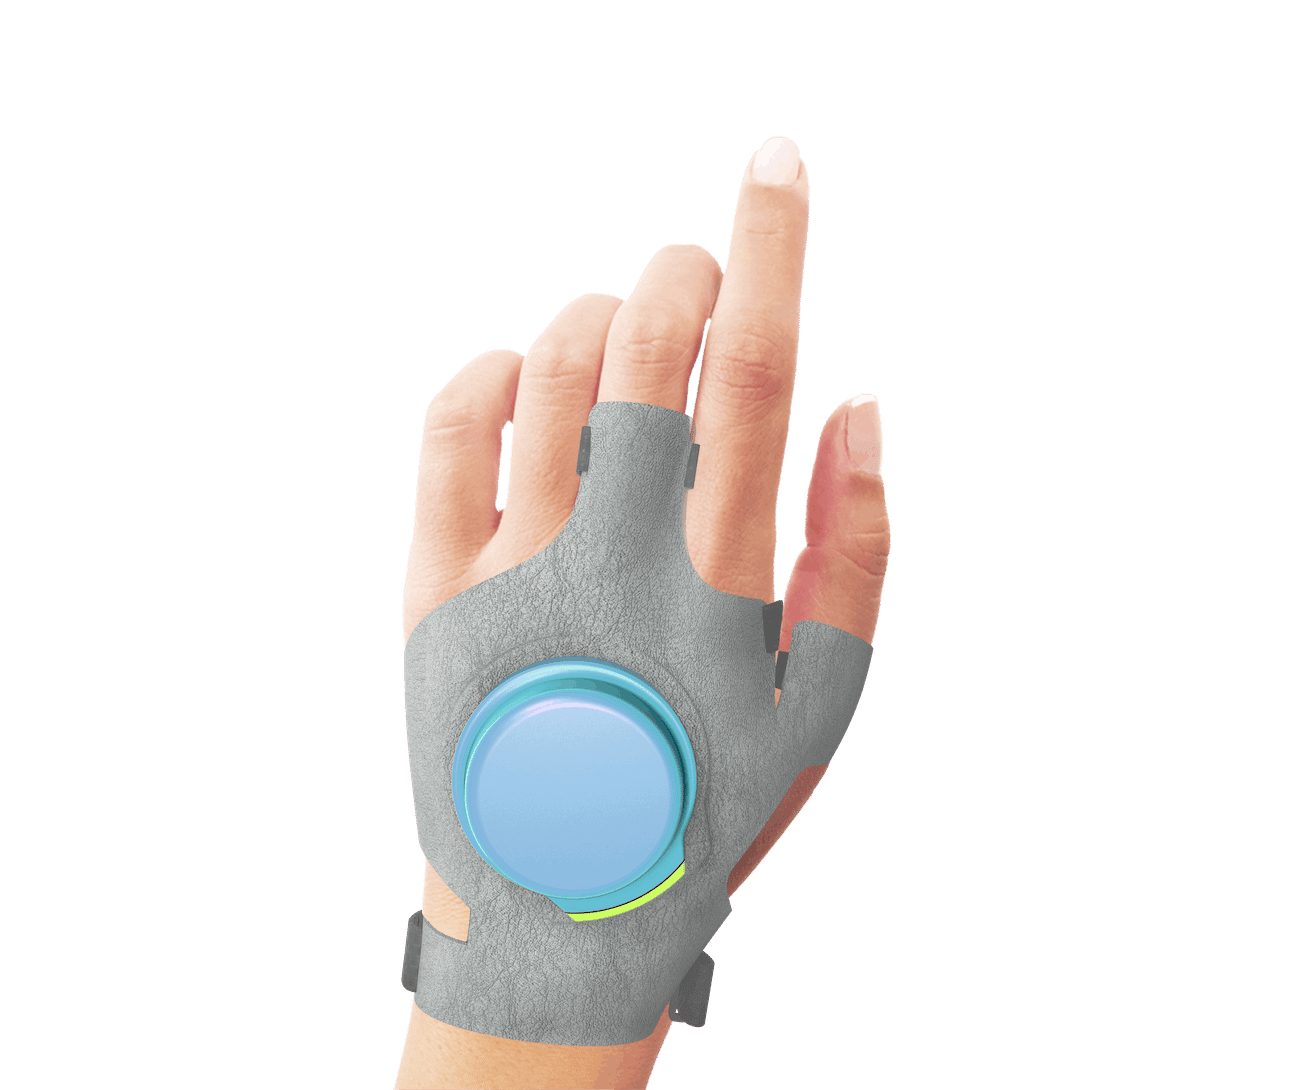 This Glove Uses Physics to Give Relief to People With Parkinson